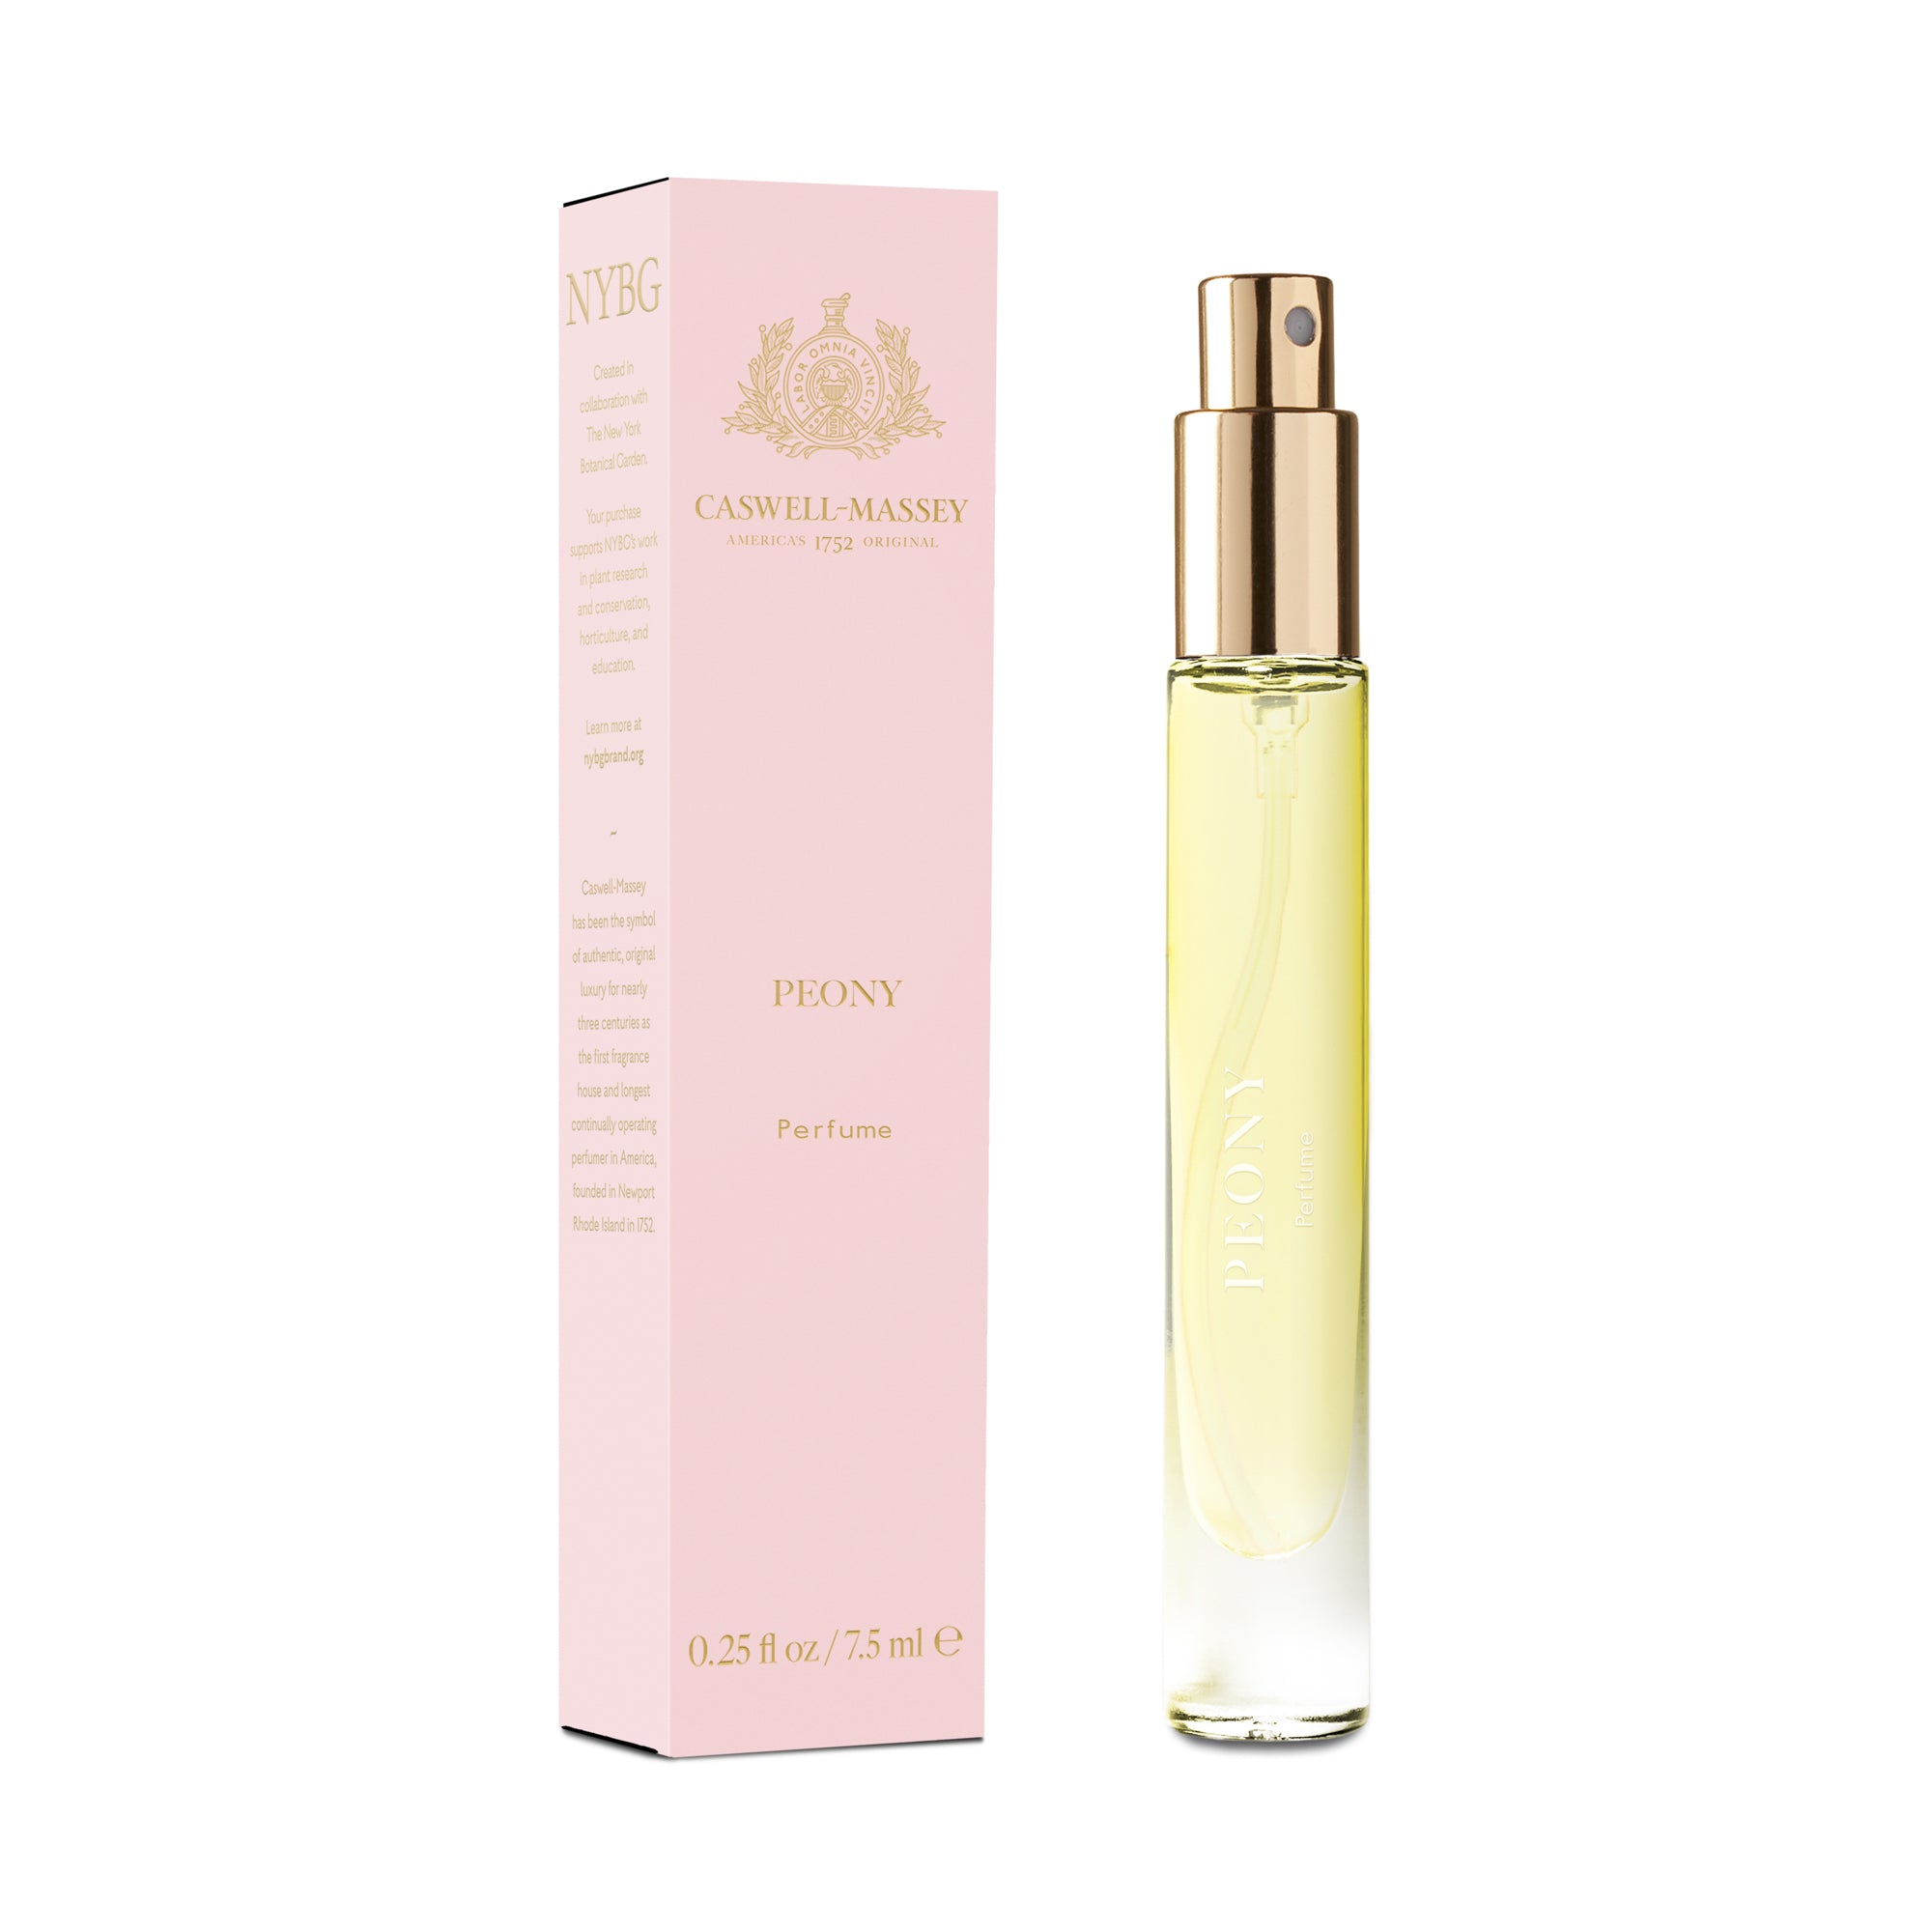 Peony Eau de Parfum, Fine Fragrance by Caswell-Massey 7.5mL Discovery Size, shown next to soft pink box